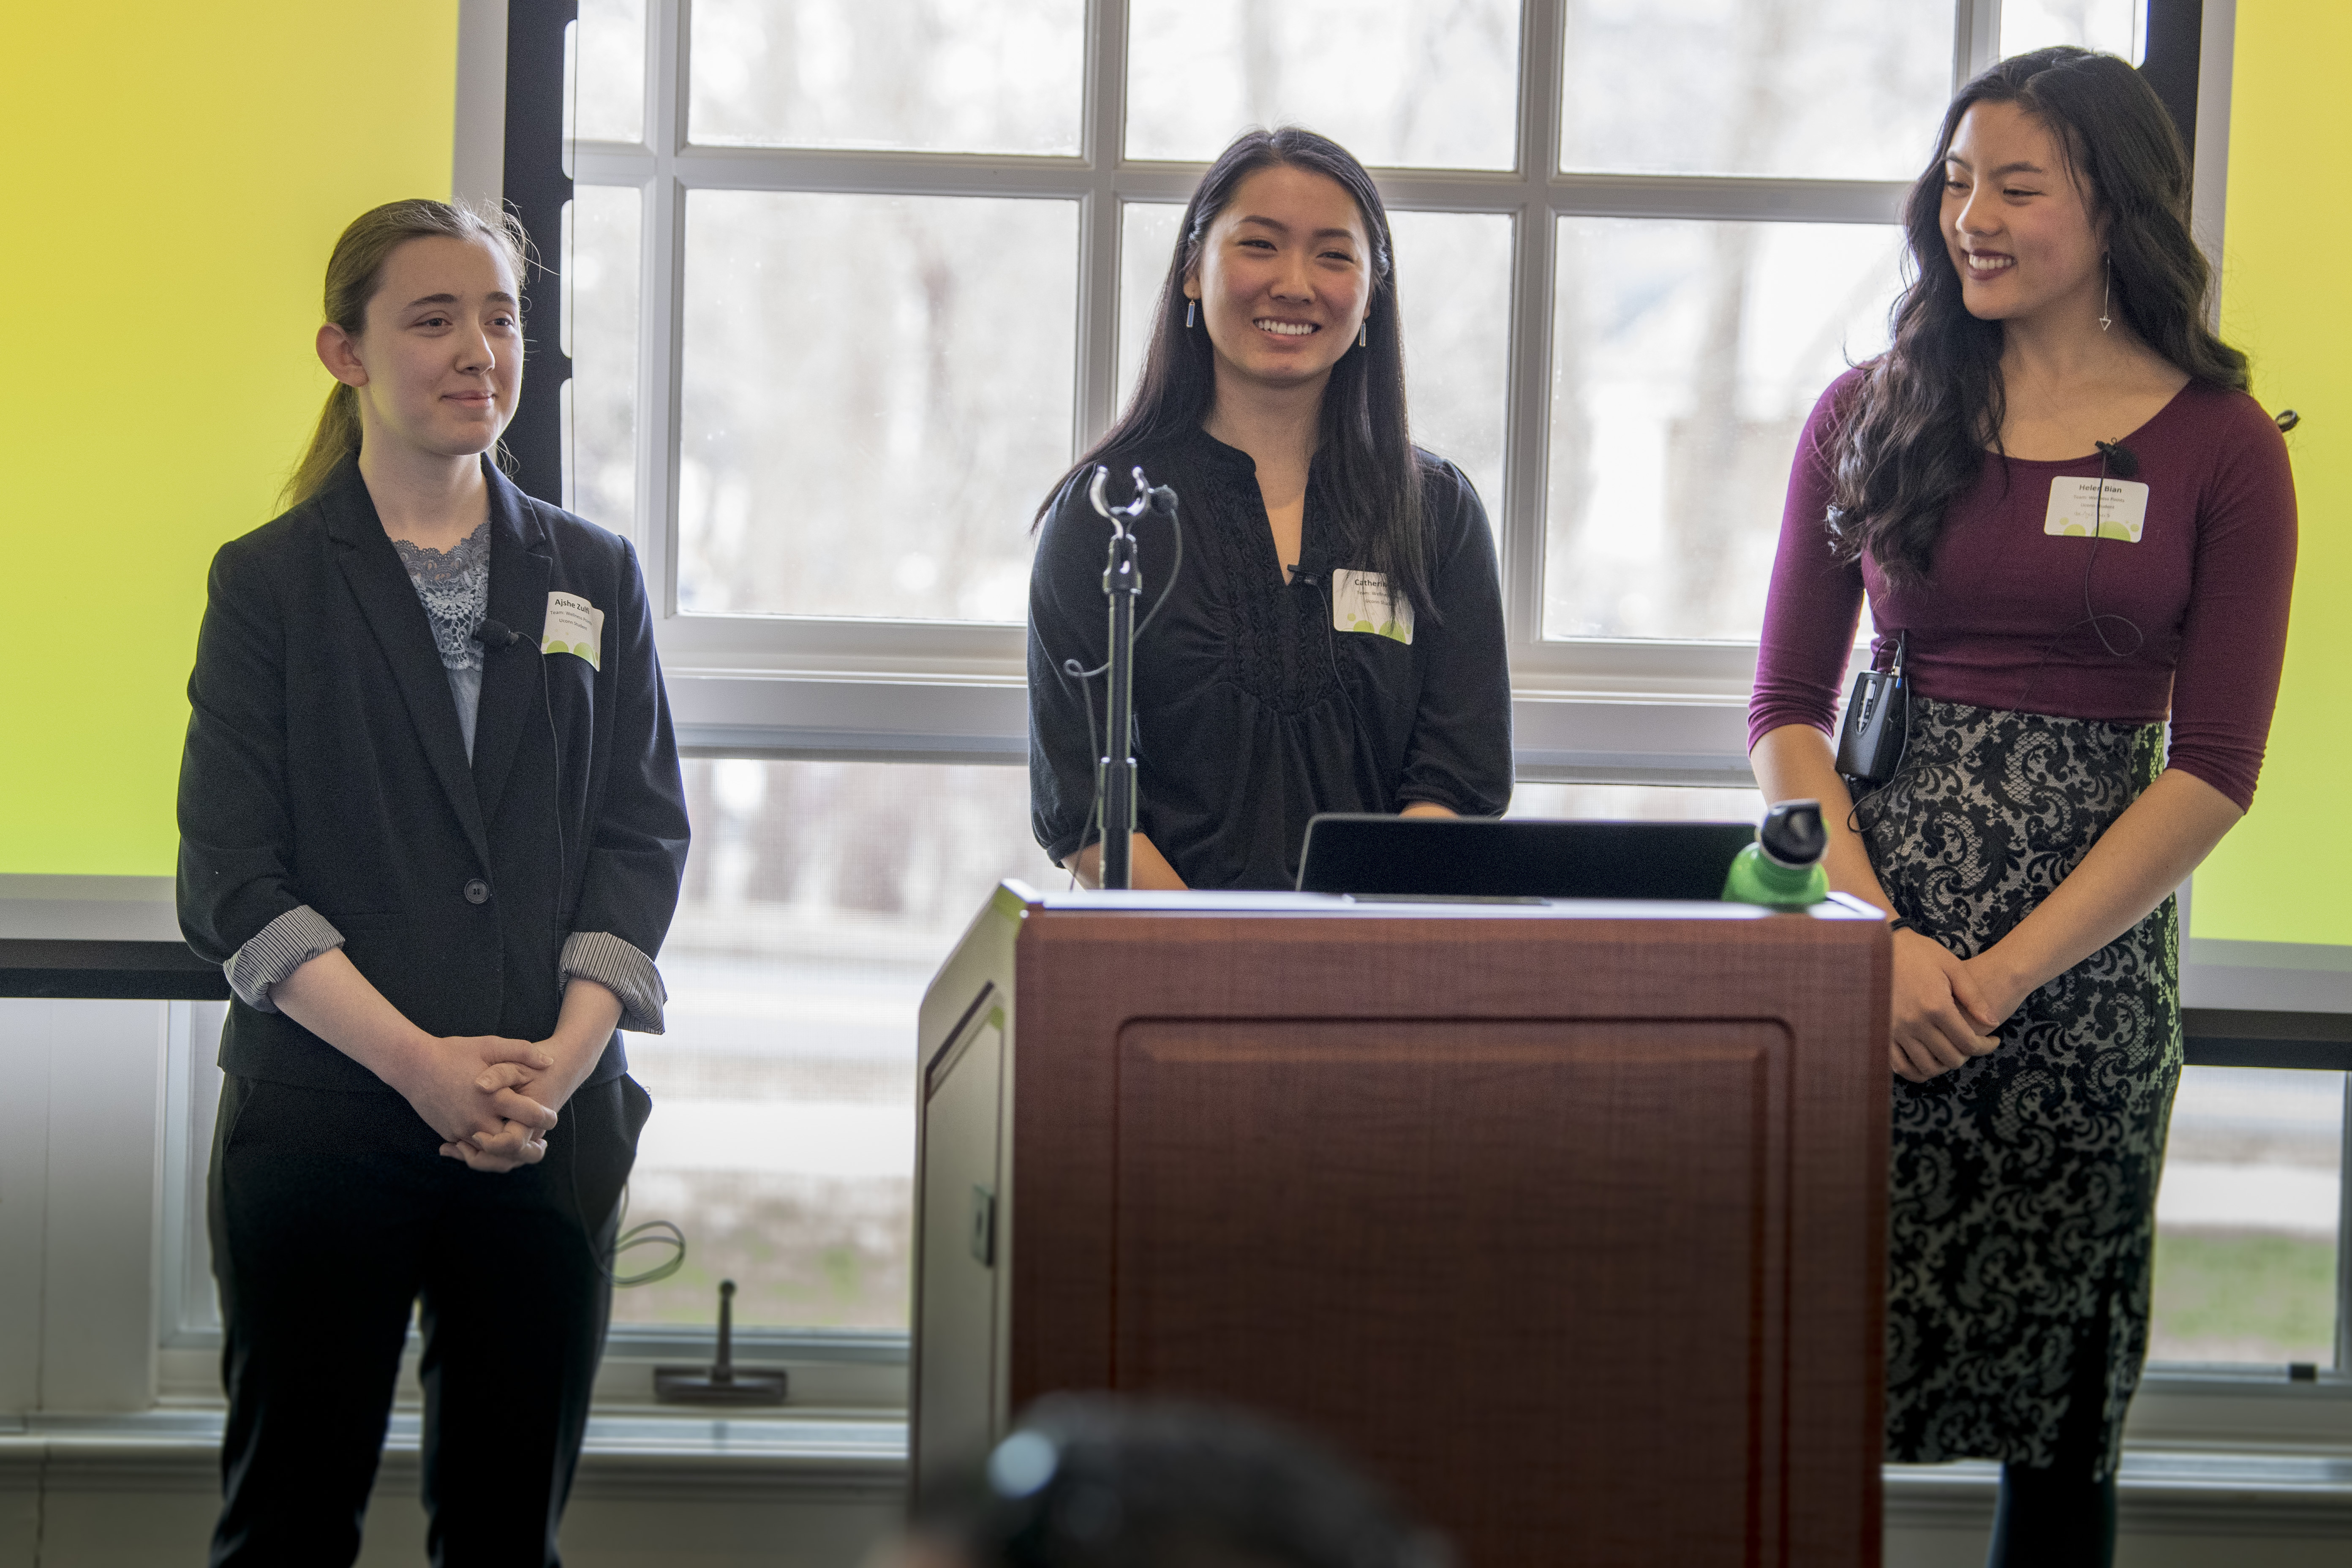 From left, Ajshe Zulfi ’21 (BUS), Catherine Qiu ’21 (CLAS), and Helen Bian ’21 (CLAS) won the 2019 Wellness Case Competition on April 5 with their proposal for 'Wellness Points' to foster student well-being. (Sean Flynn/UConn Photo)